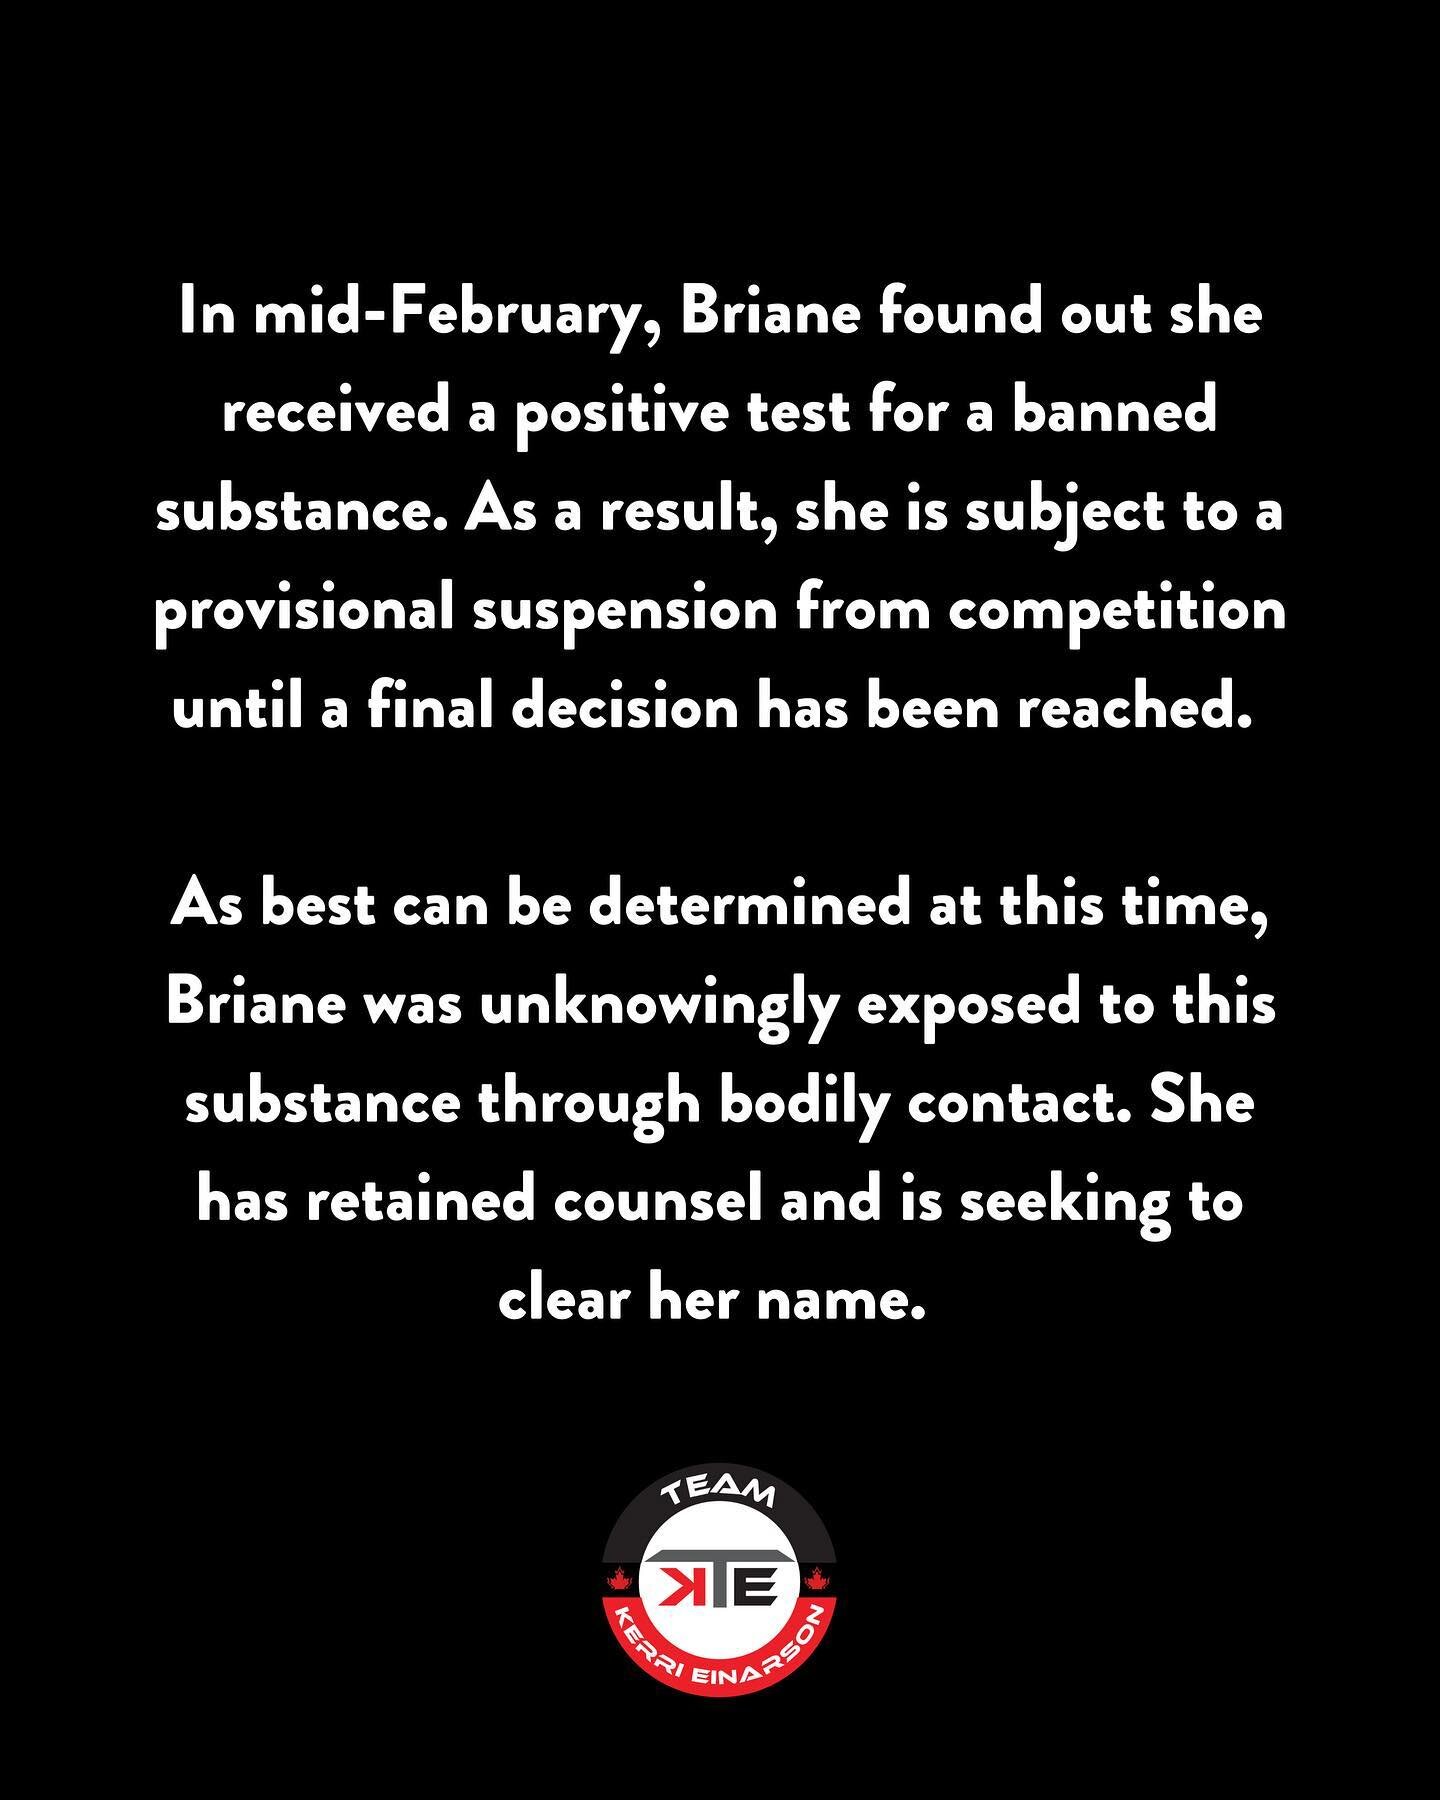 In mid-February, Briane found out she received a positive test for a banned substance. As a result, she is subject to a provisional suspension from competition until a final decision has been reached.

As best can be determined at this time, Briane w